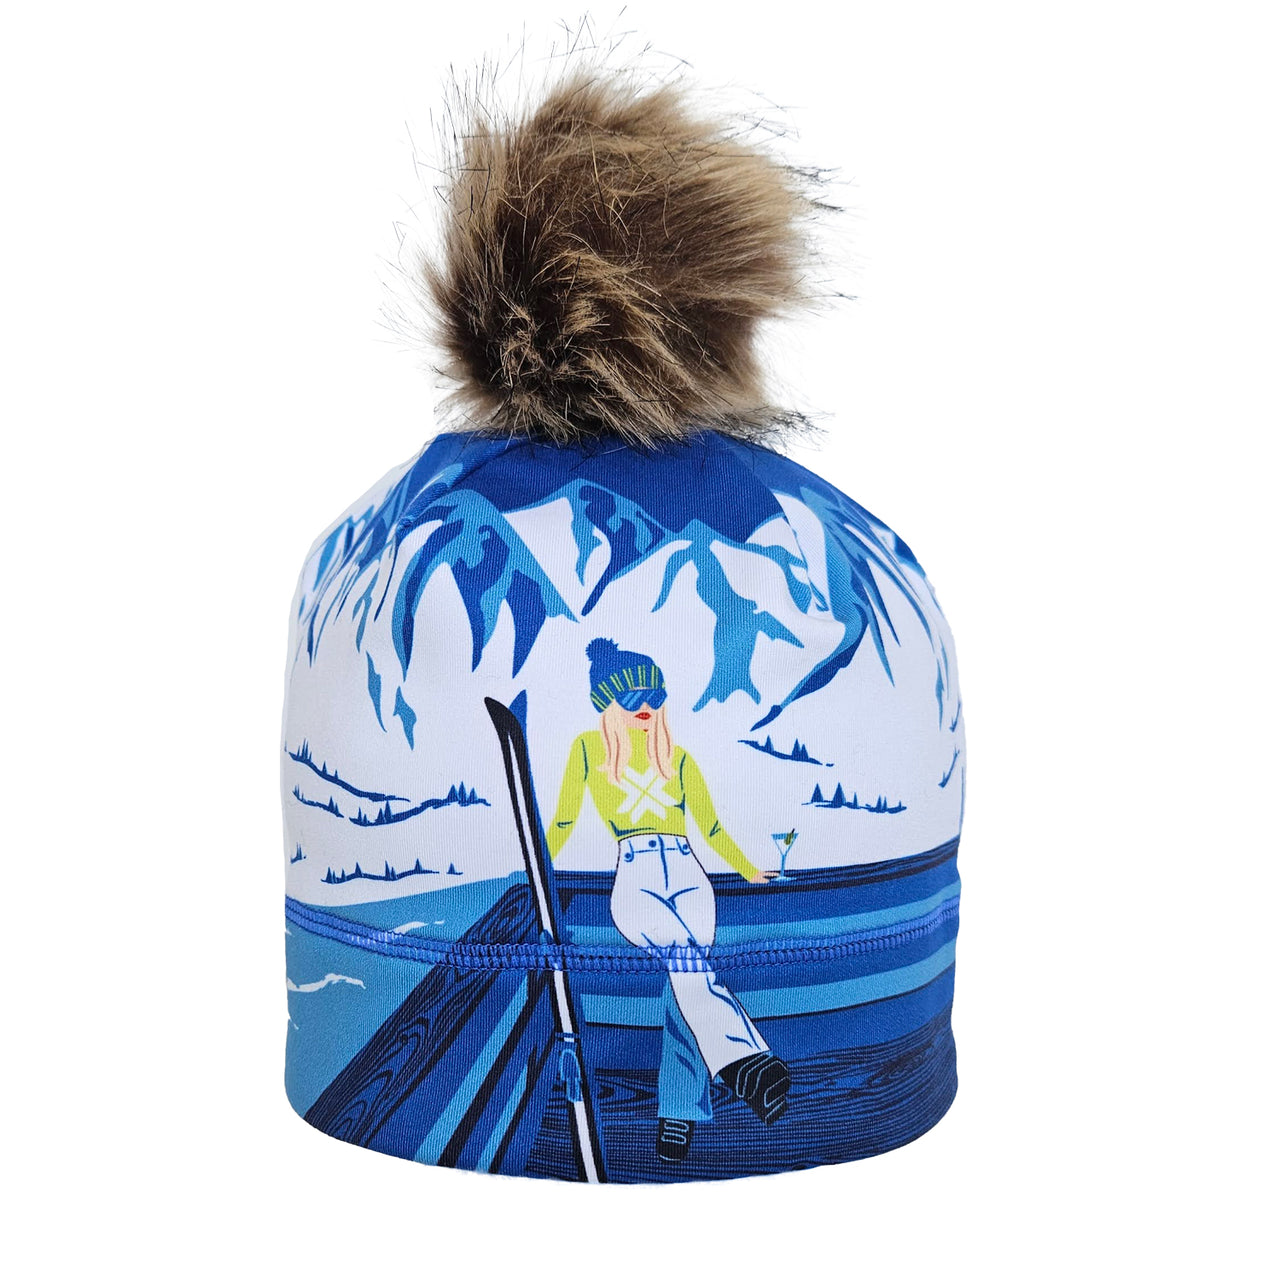 Ilustrated Beanie